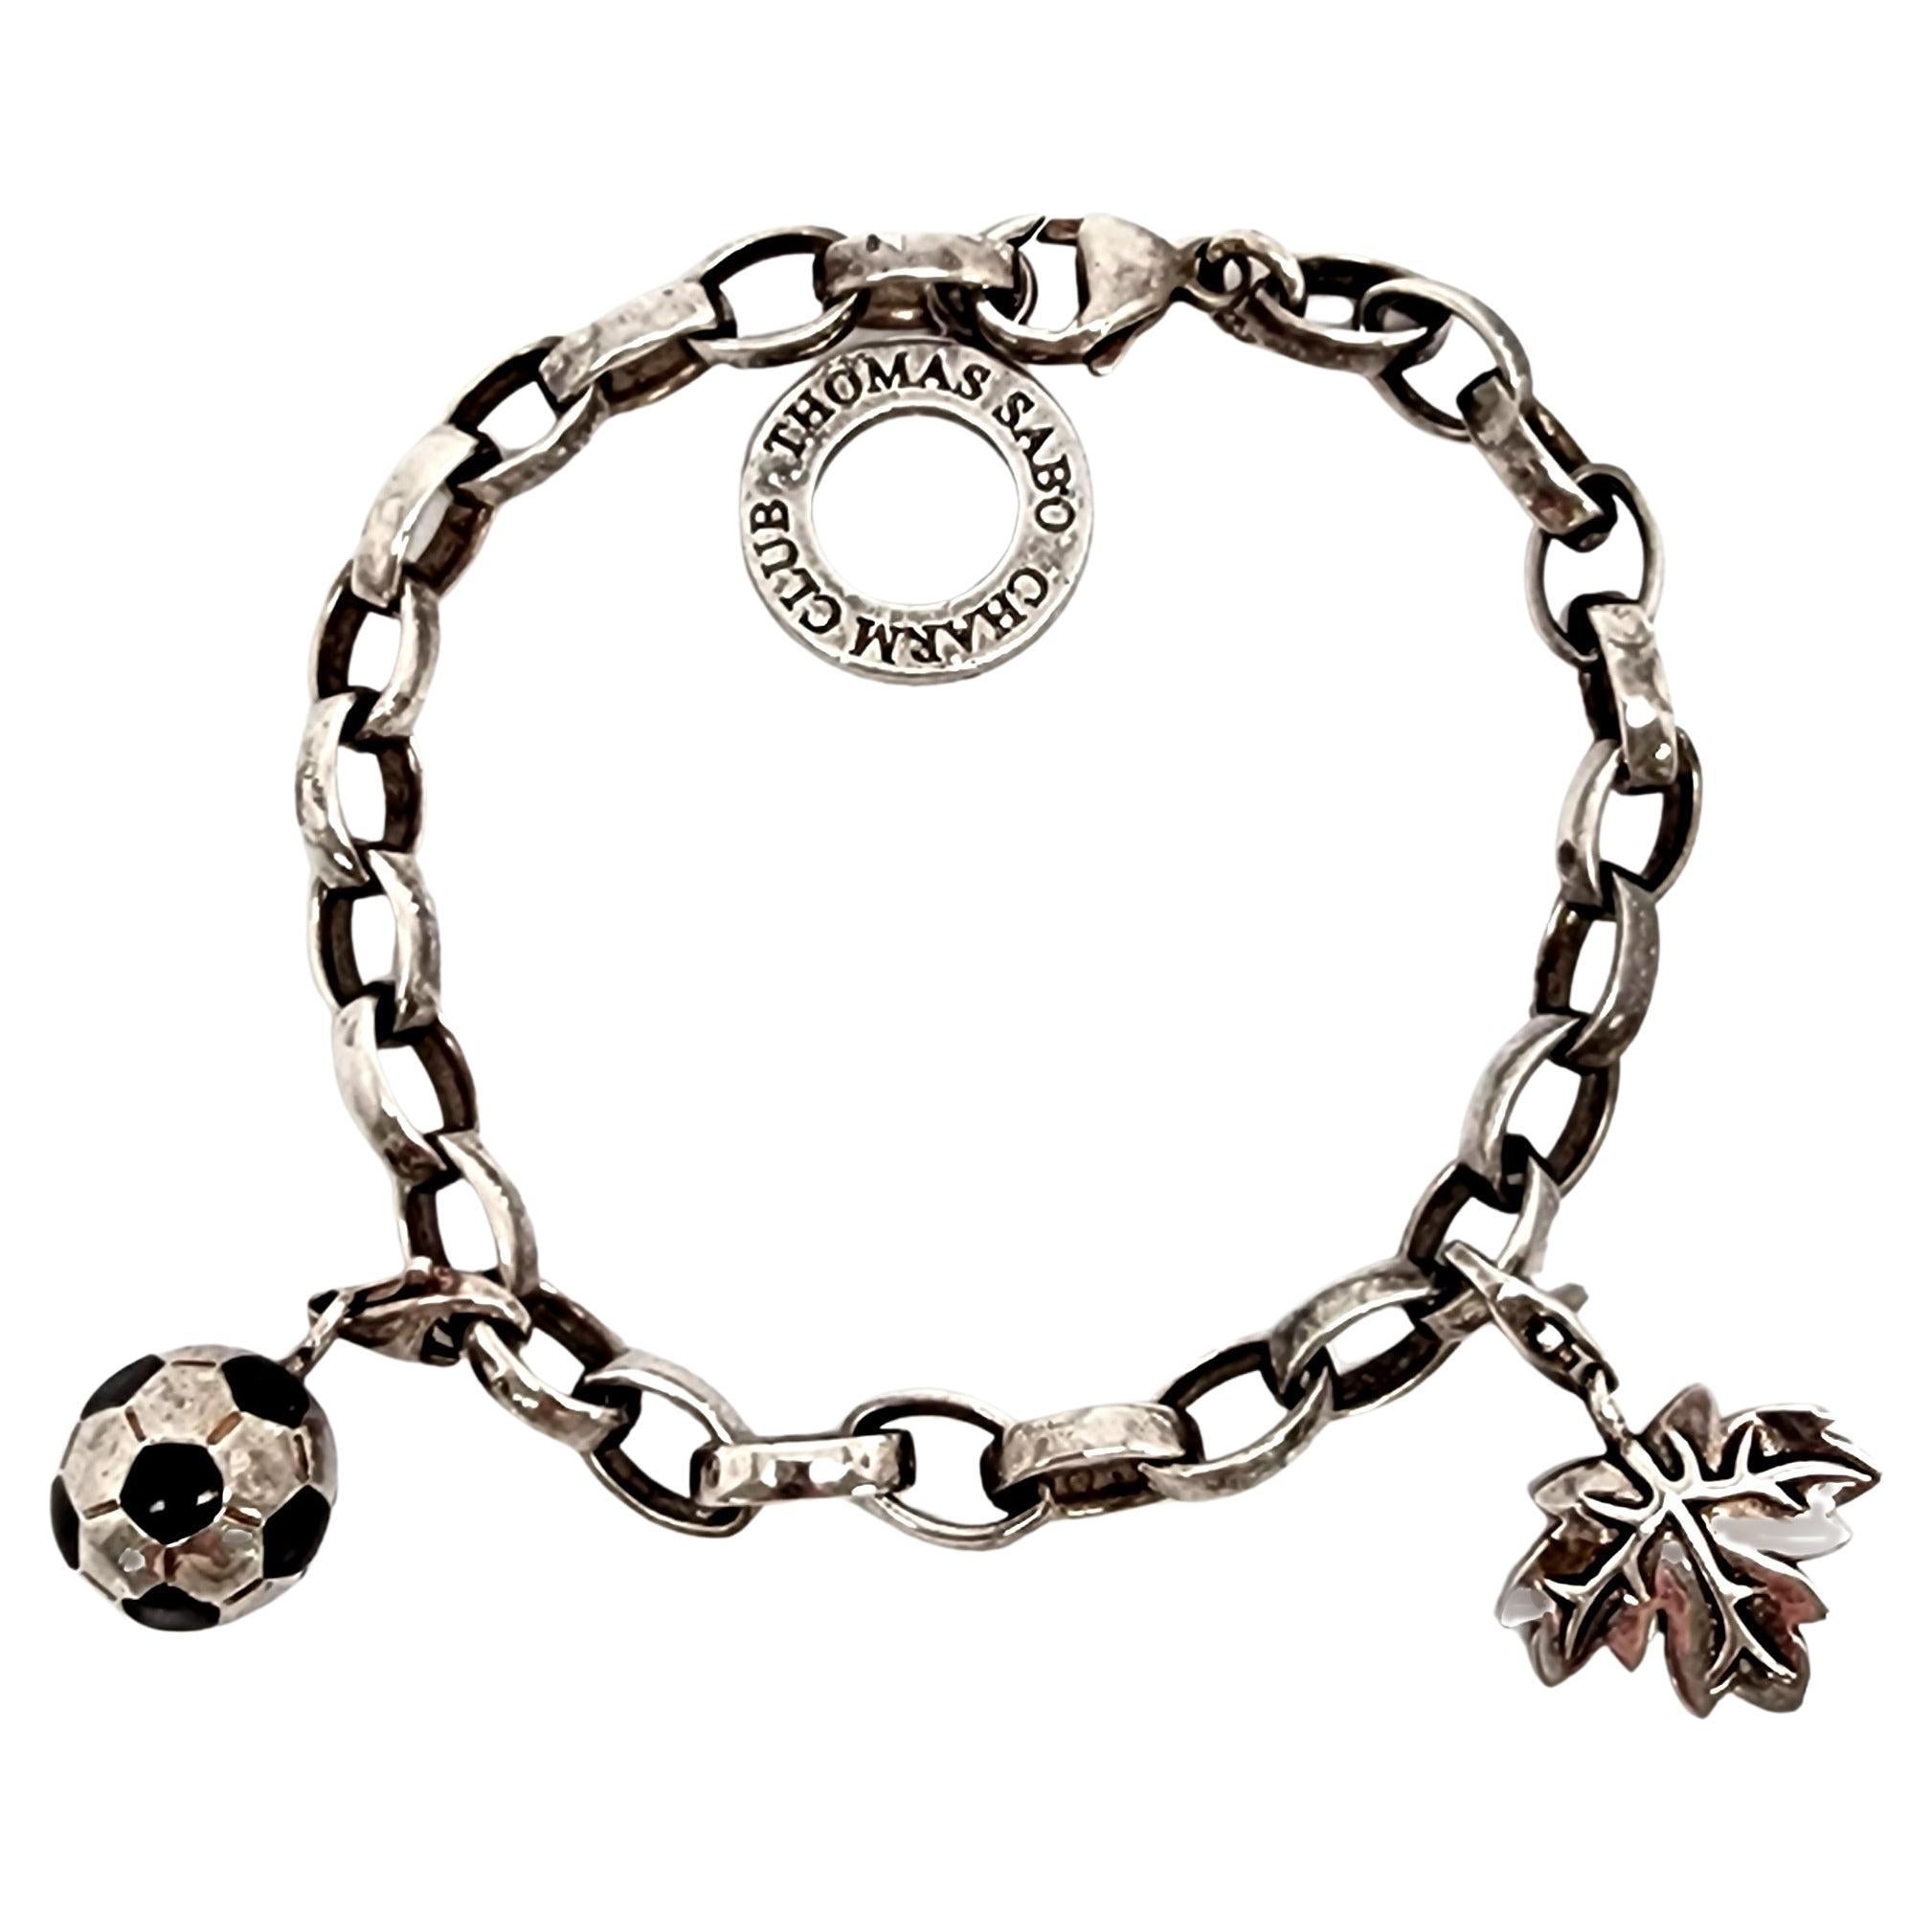 Thomas Sabo Charm Club SS Bracelet with Soccer Ball and Leaf Charms #14459 For Sale